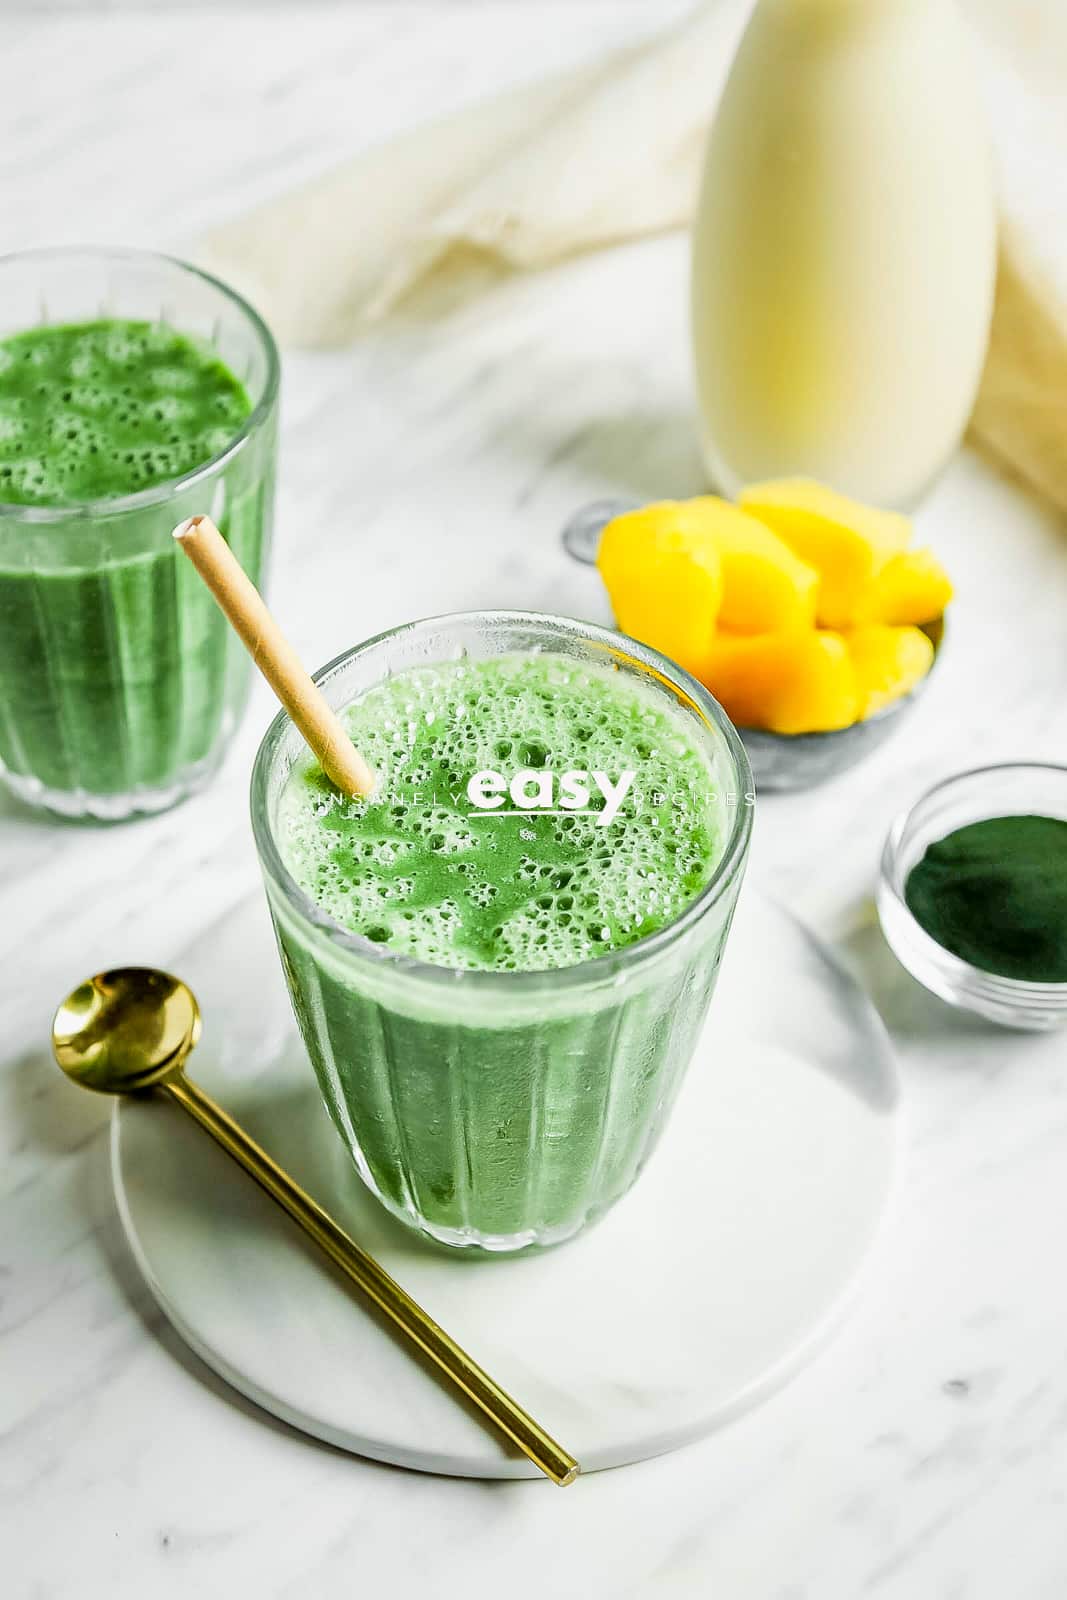 Closeup photo of Spirulina Smoothie in a glass jar with a paper straw, on a white plate with a gold spoon. There are frozen pineapples in the background and another glass of smoothie.